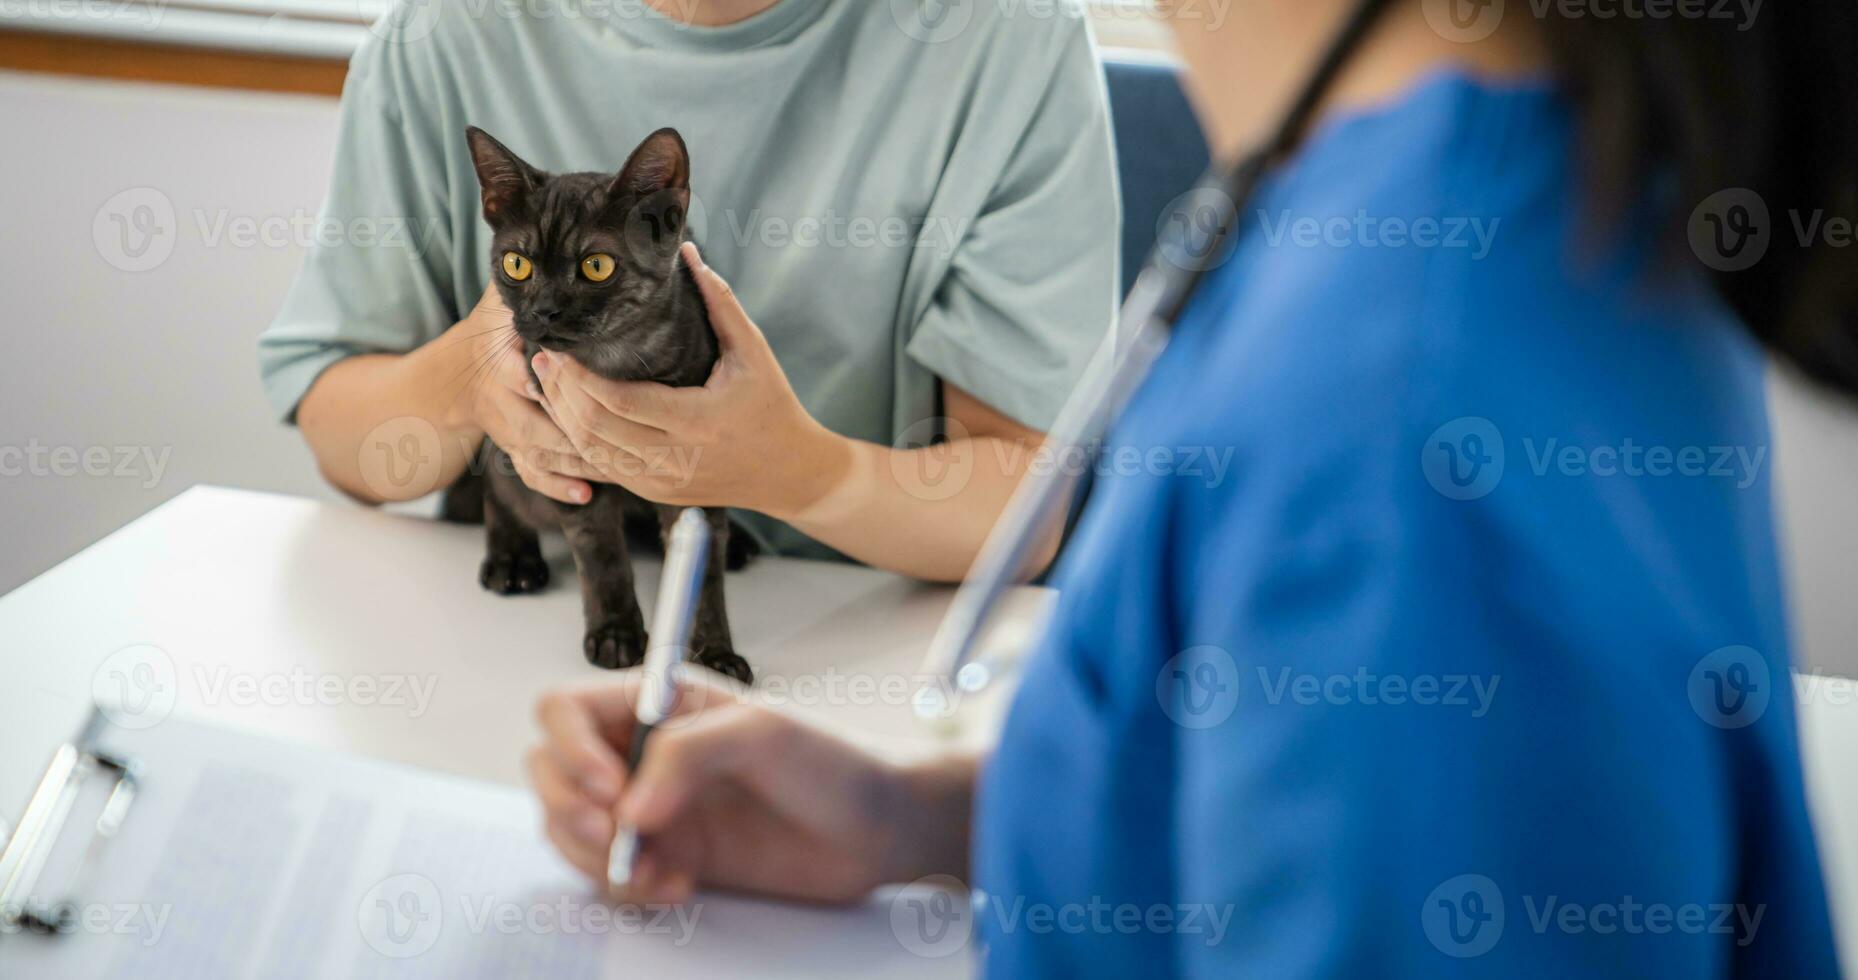 Professional vet doctor helps cat. owner cat holding pet on hands. Cat on examination table of veterinarian clinic. Veterinary care. Vet doctor and cat photo